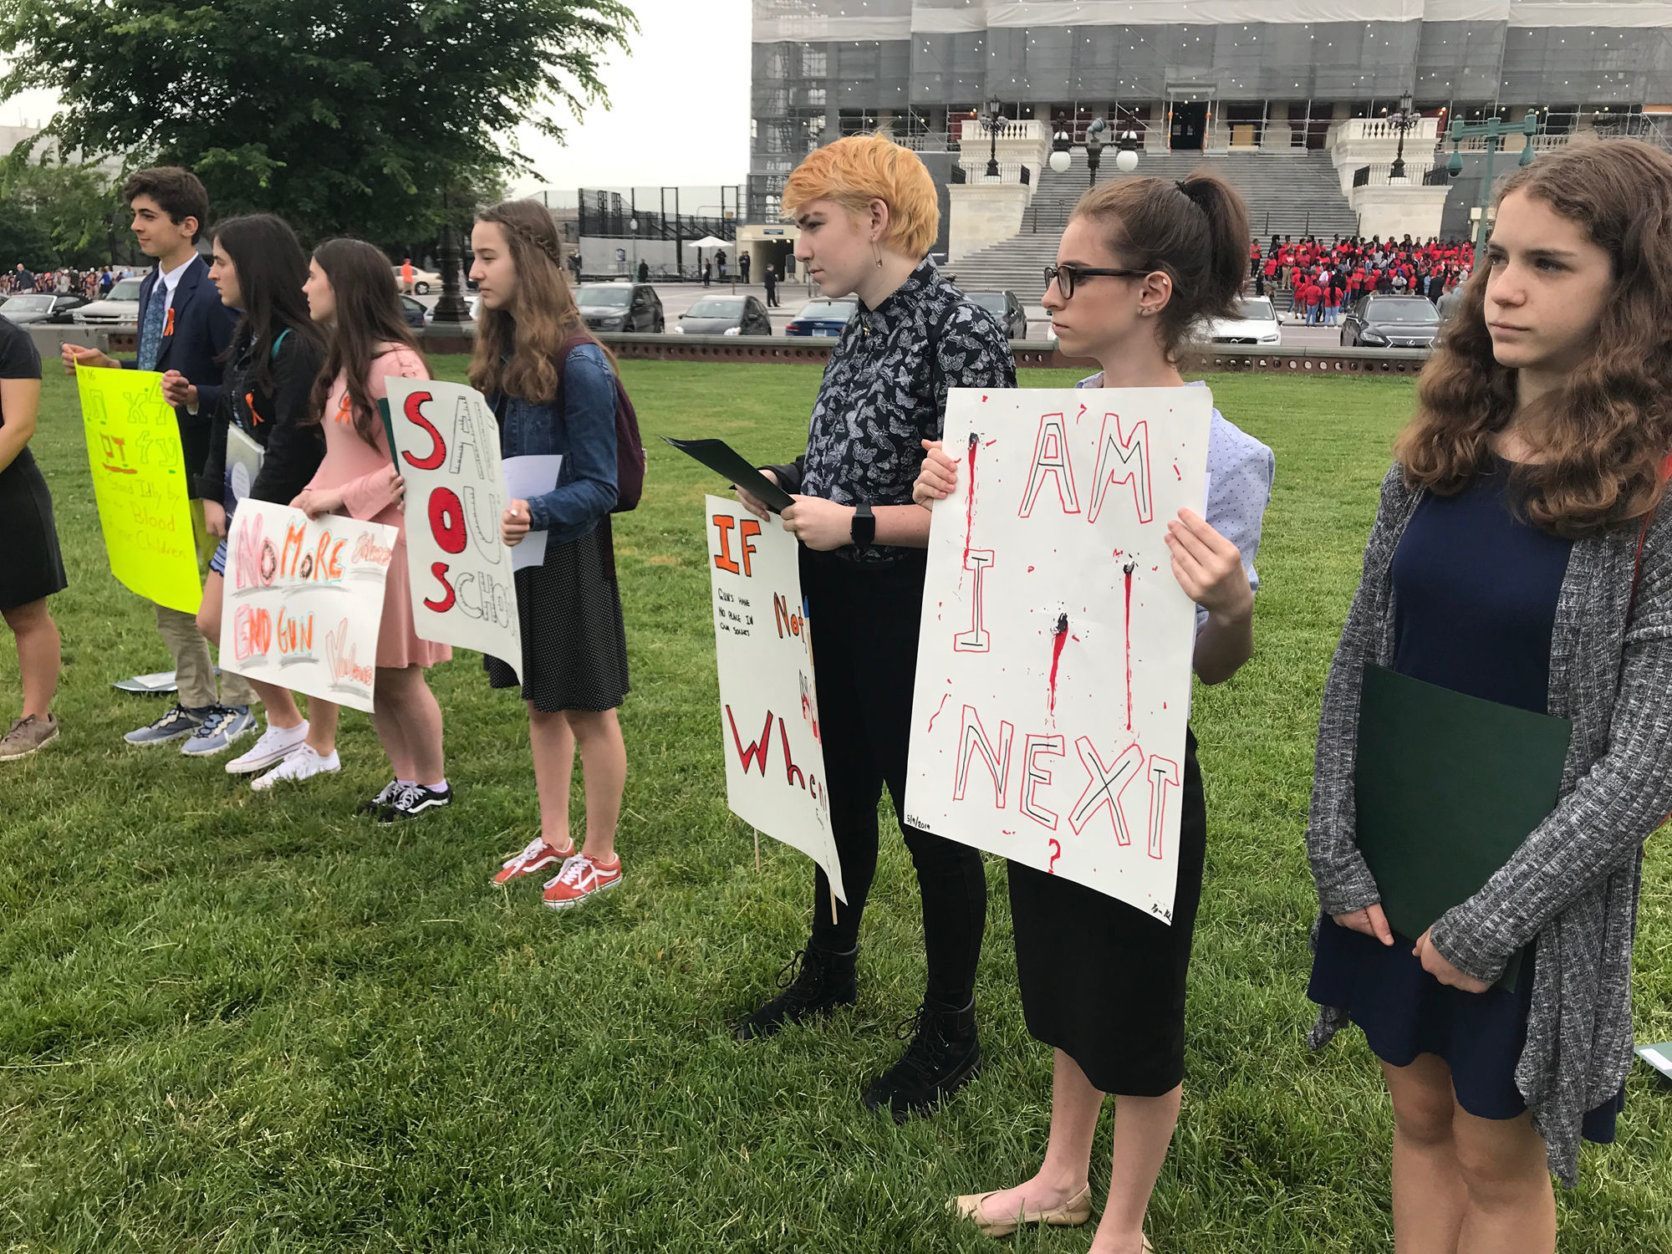 The group from Temple Emanuel, in Kensington, read the names of students who were killed last year at U.S. schools and held a moment of silence in front of the U.S. Capitol. (WTOP/Mitchell Miller)